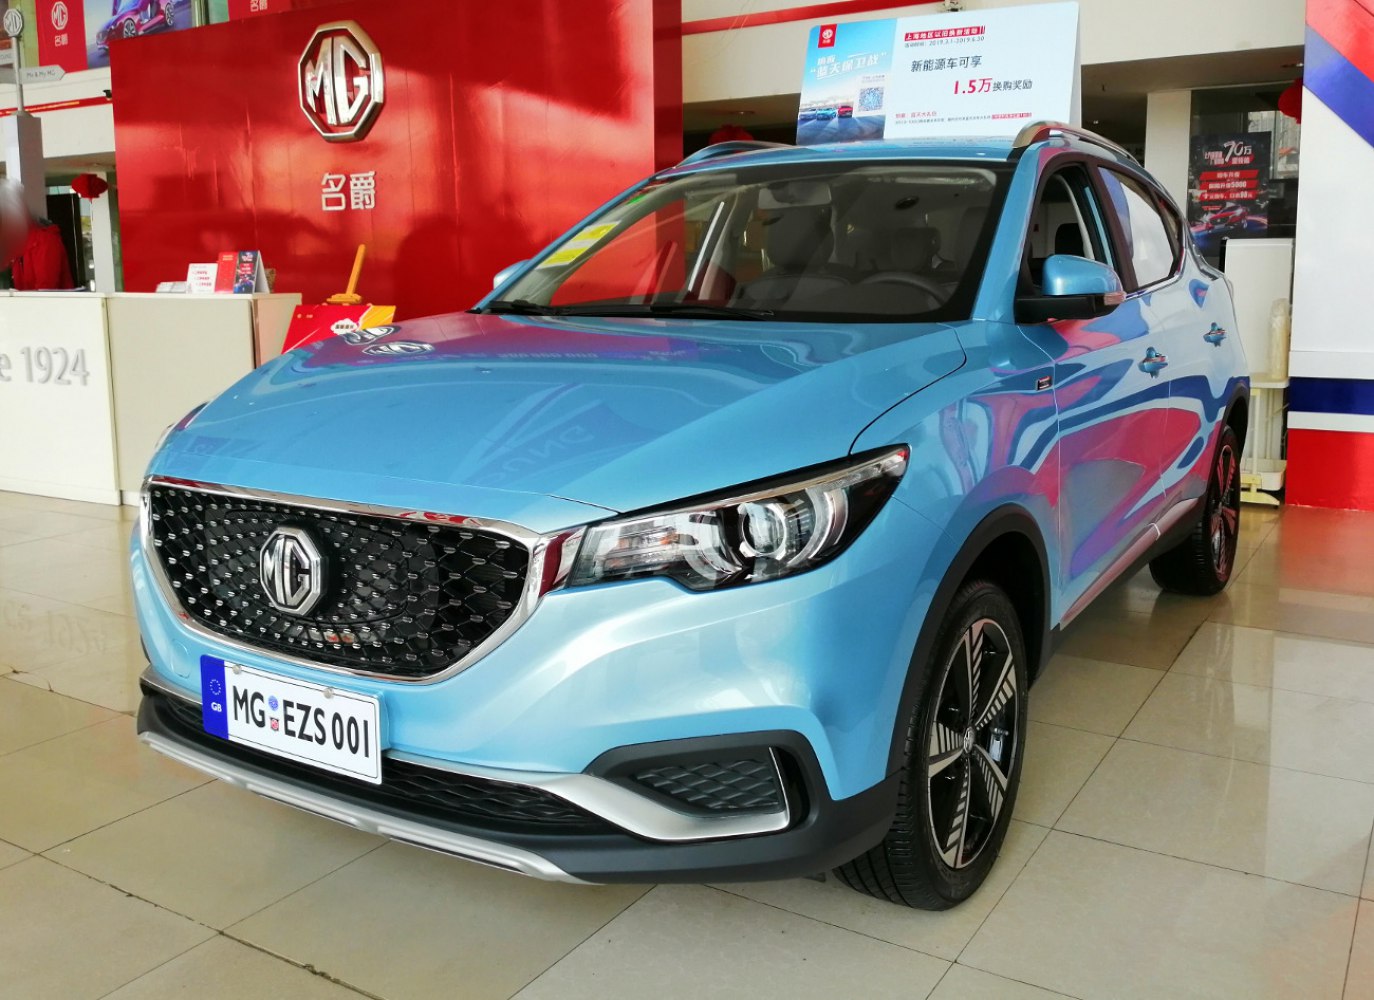 https://totalrenting.es/wp-content/uploads/2022/10/mg-zs-ev-2019-44-5-kwh-143-cv-suv.png